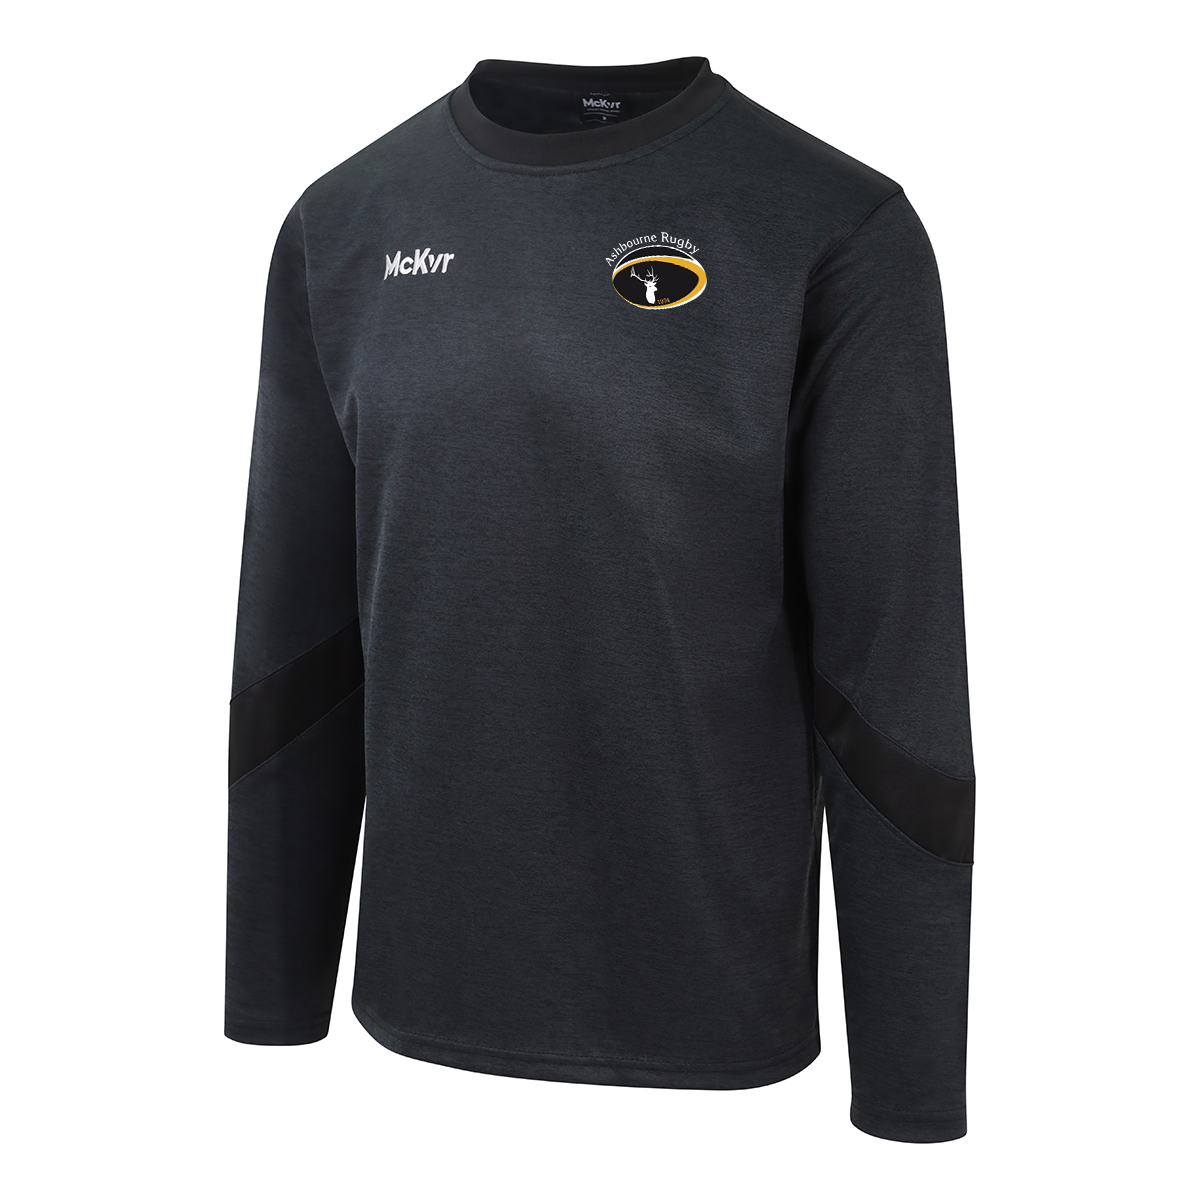 Mc Keever Ashbourne Rugby Core 22 Sweat Top - Adult - Black